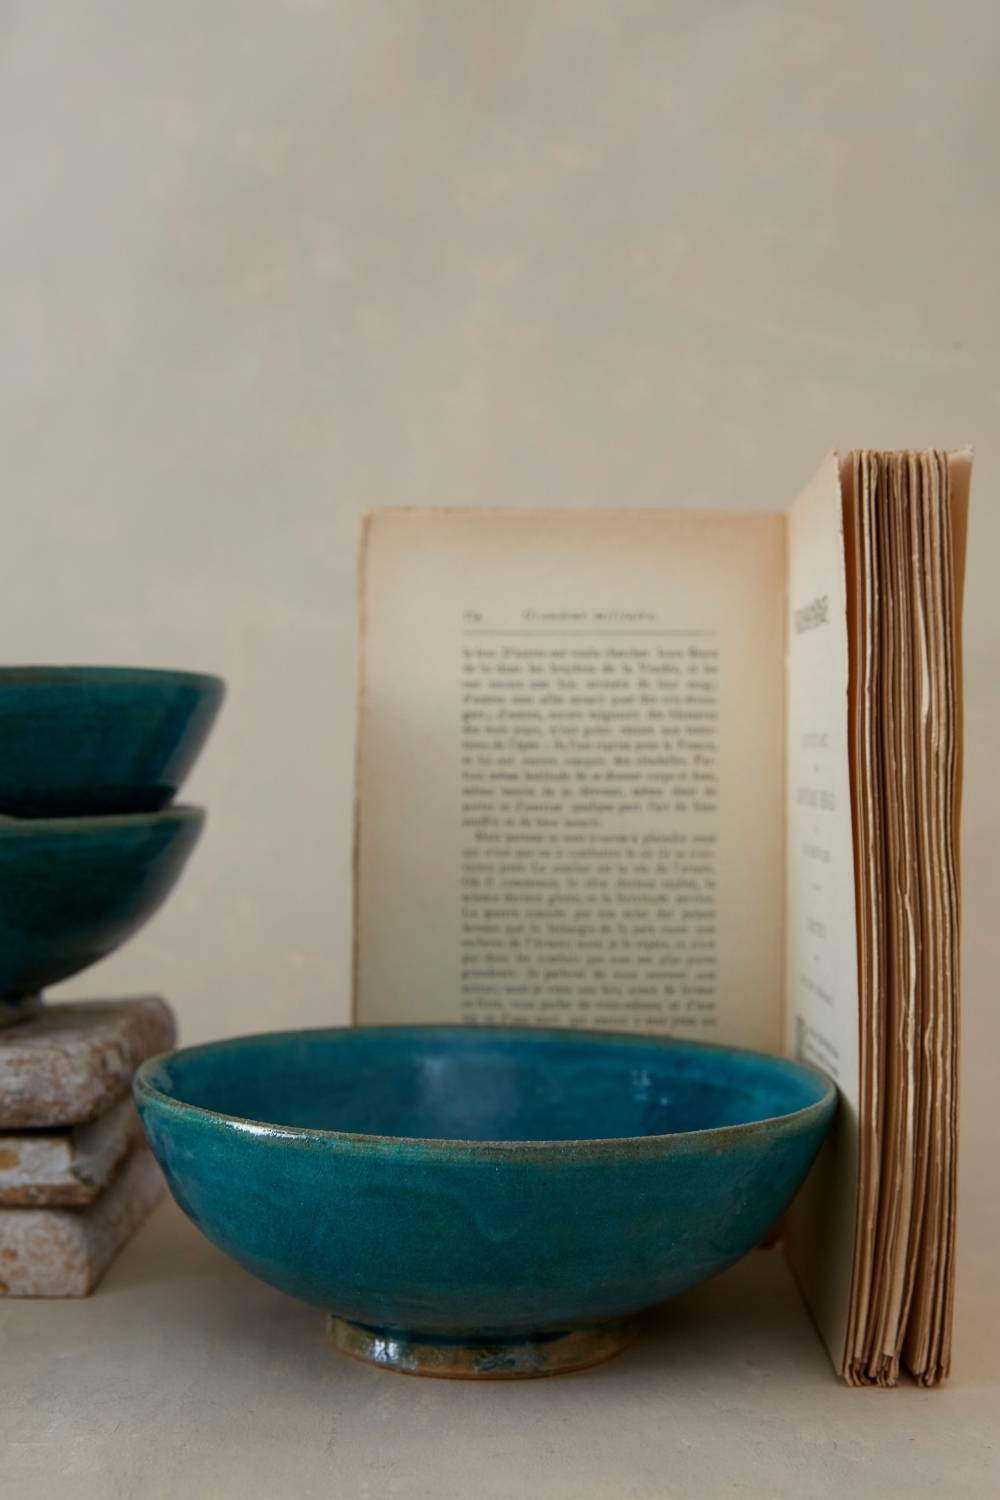 Artisan & Fox - Home Goods - Turquoise Istalifi Bowl - Handcrafted in Afghanistan